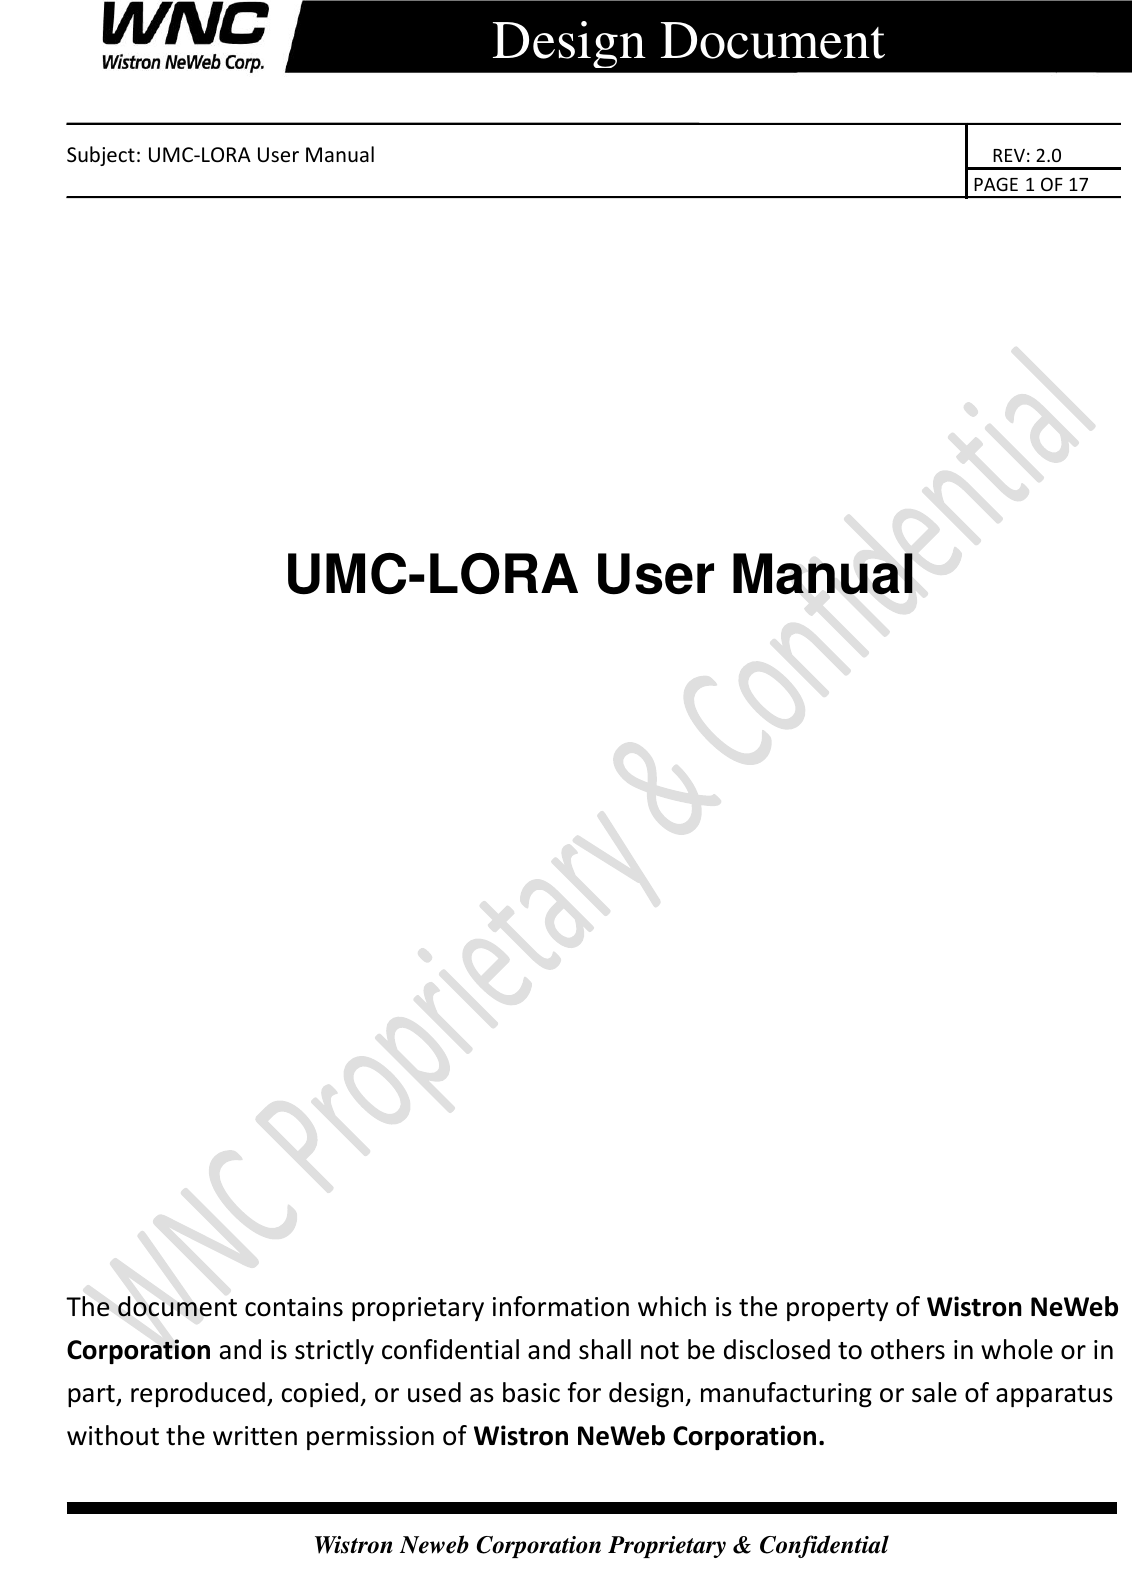    Subject: UMC-LORA User Manual                                                                      REV: 2.0                                                                                        PAGE 1 OF 17  Wistron Neweb Corporation Proprietary &amp; Confidential      Design Document          UMC-LORA User Manual                   The document contains proprietary information which is the property of Wistron NeWeb Corporation and is strictly confidential and shall not be disclosed to others in whole or in part, reproduced, copied, or used as basic for design, manufacturing or sale of apparatus without the written permission of Wistron NeWeb Corporation. 